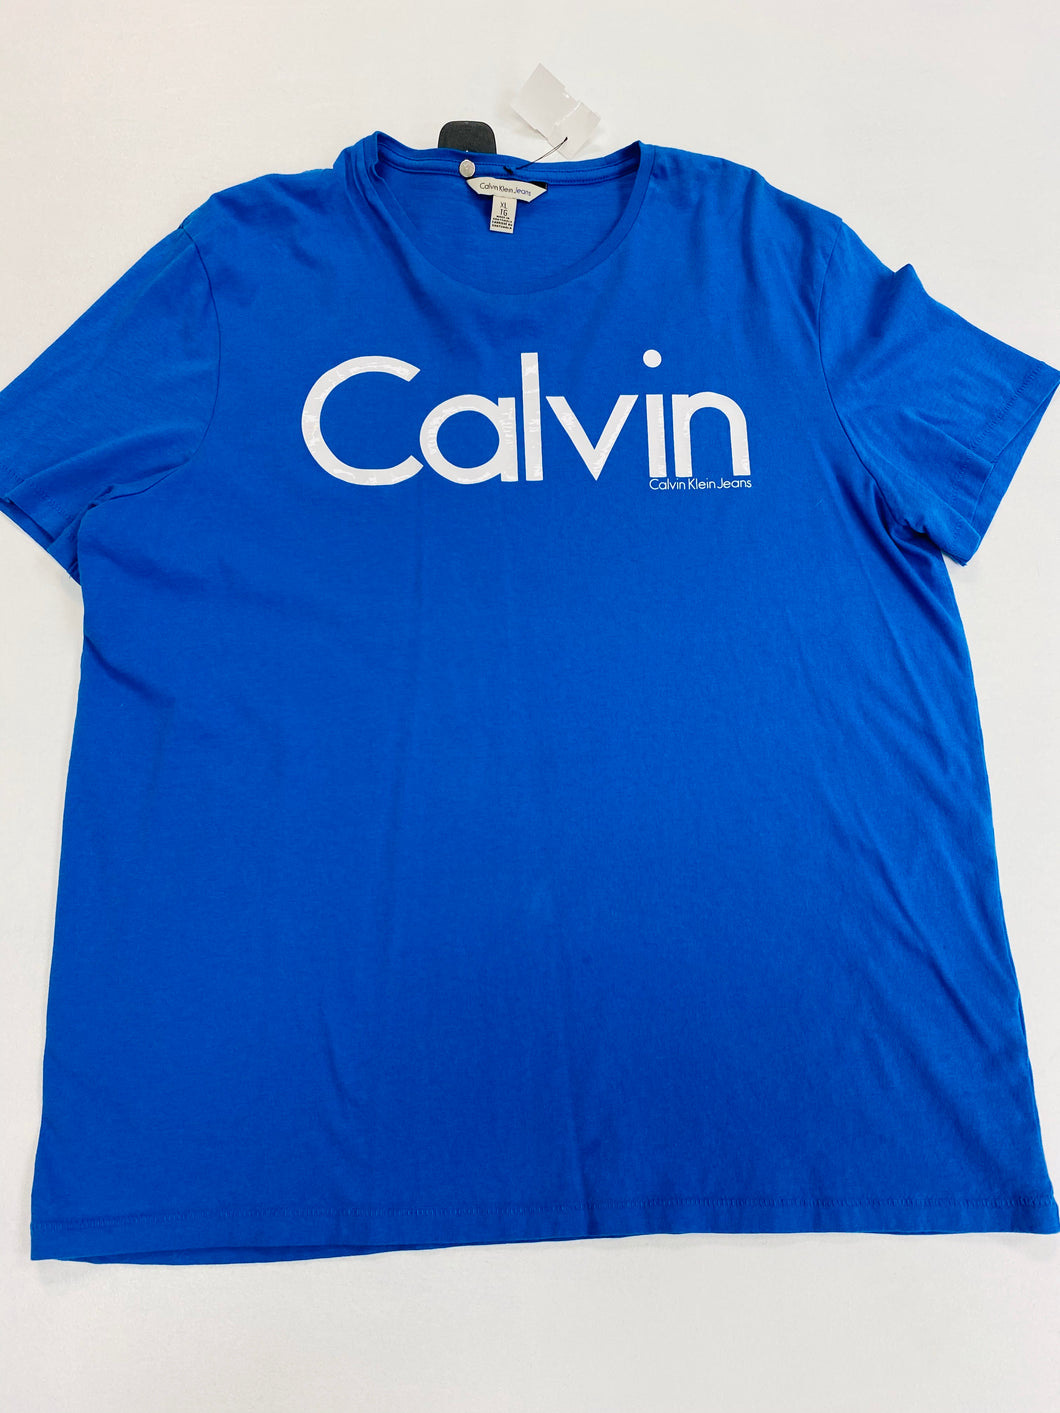 Calvin Klein Mens Short Sleeve Top Size Extra Large